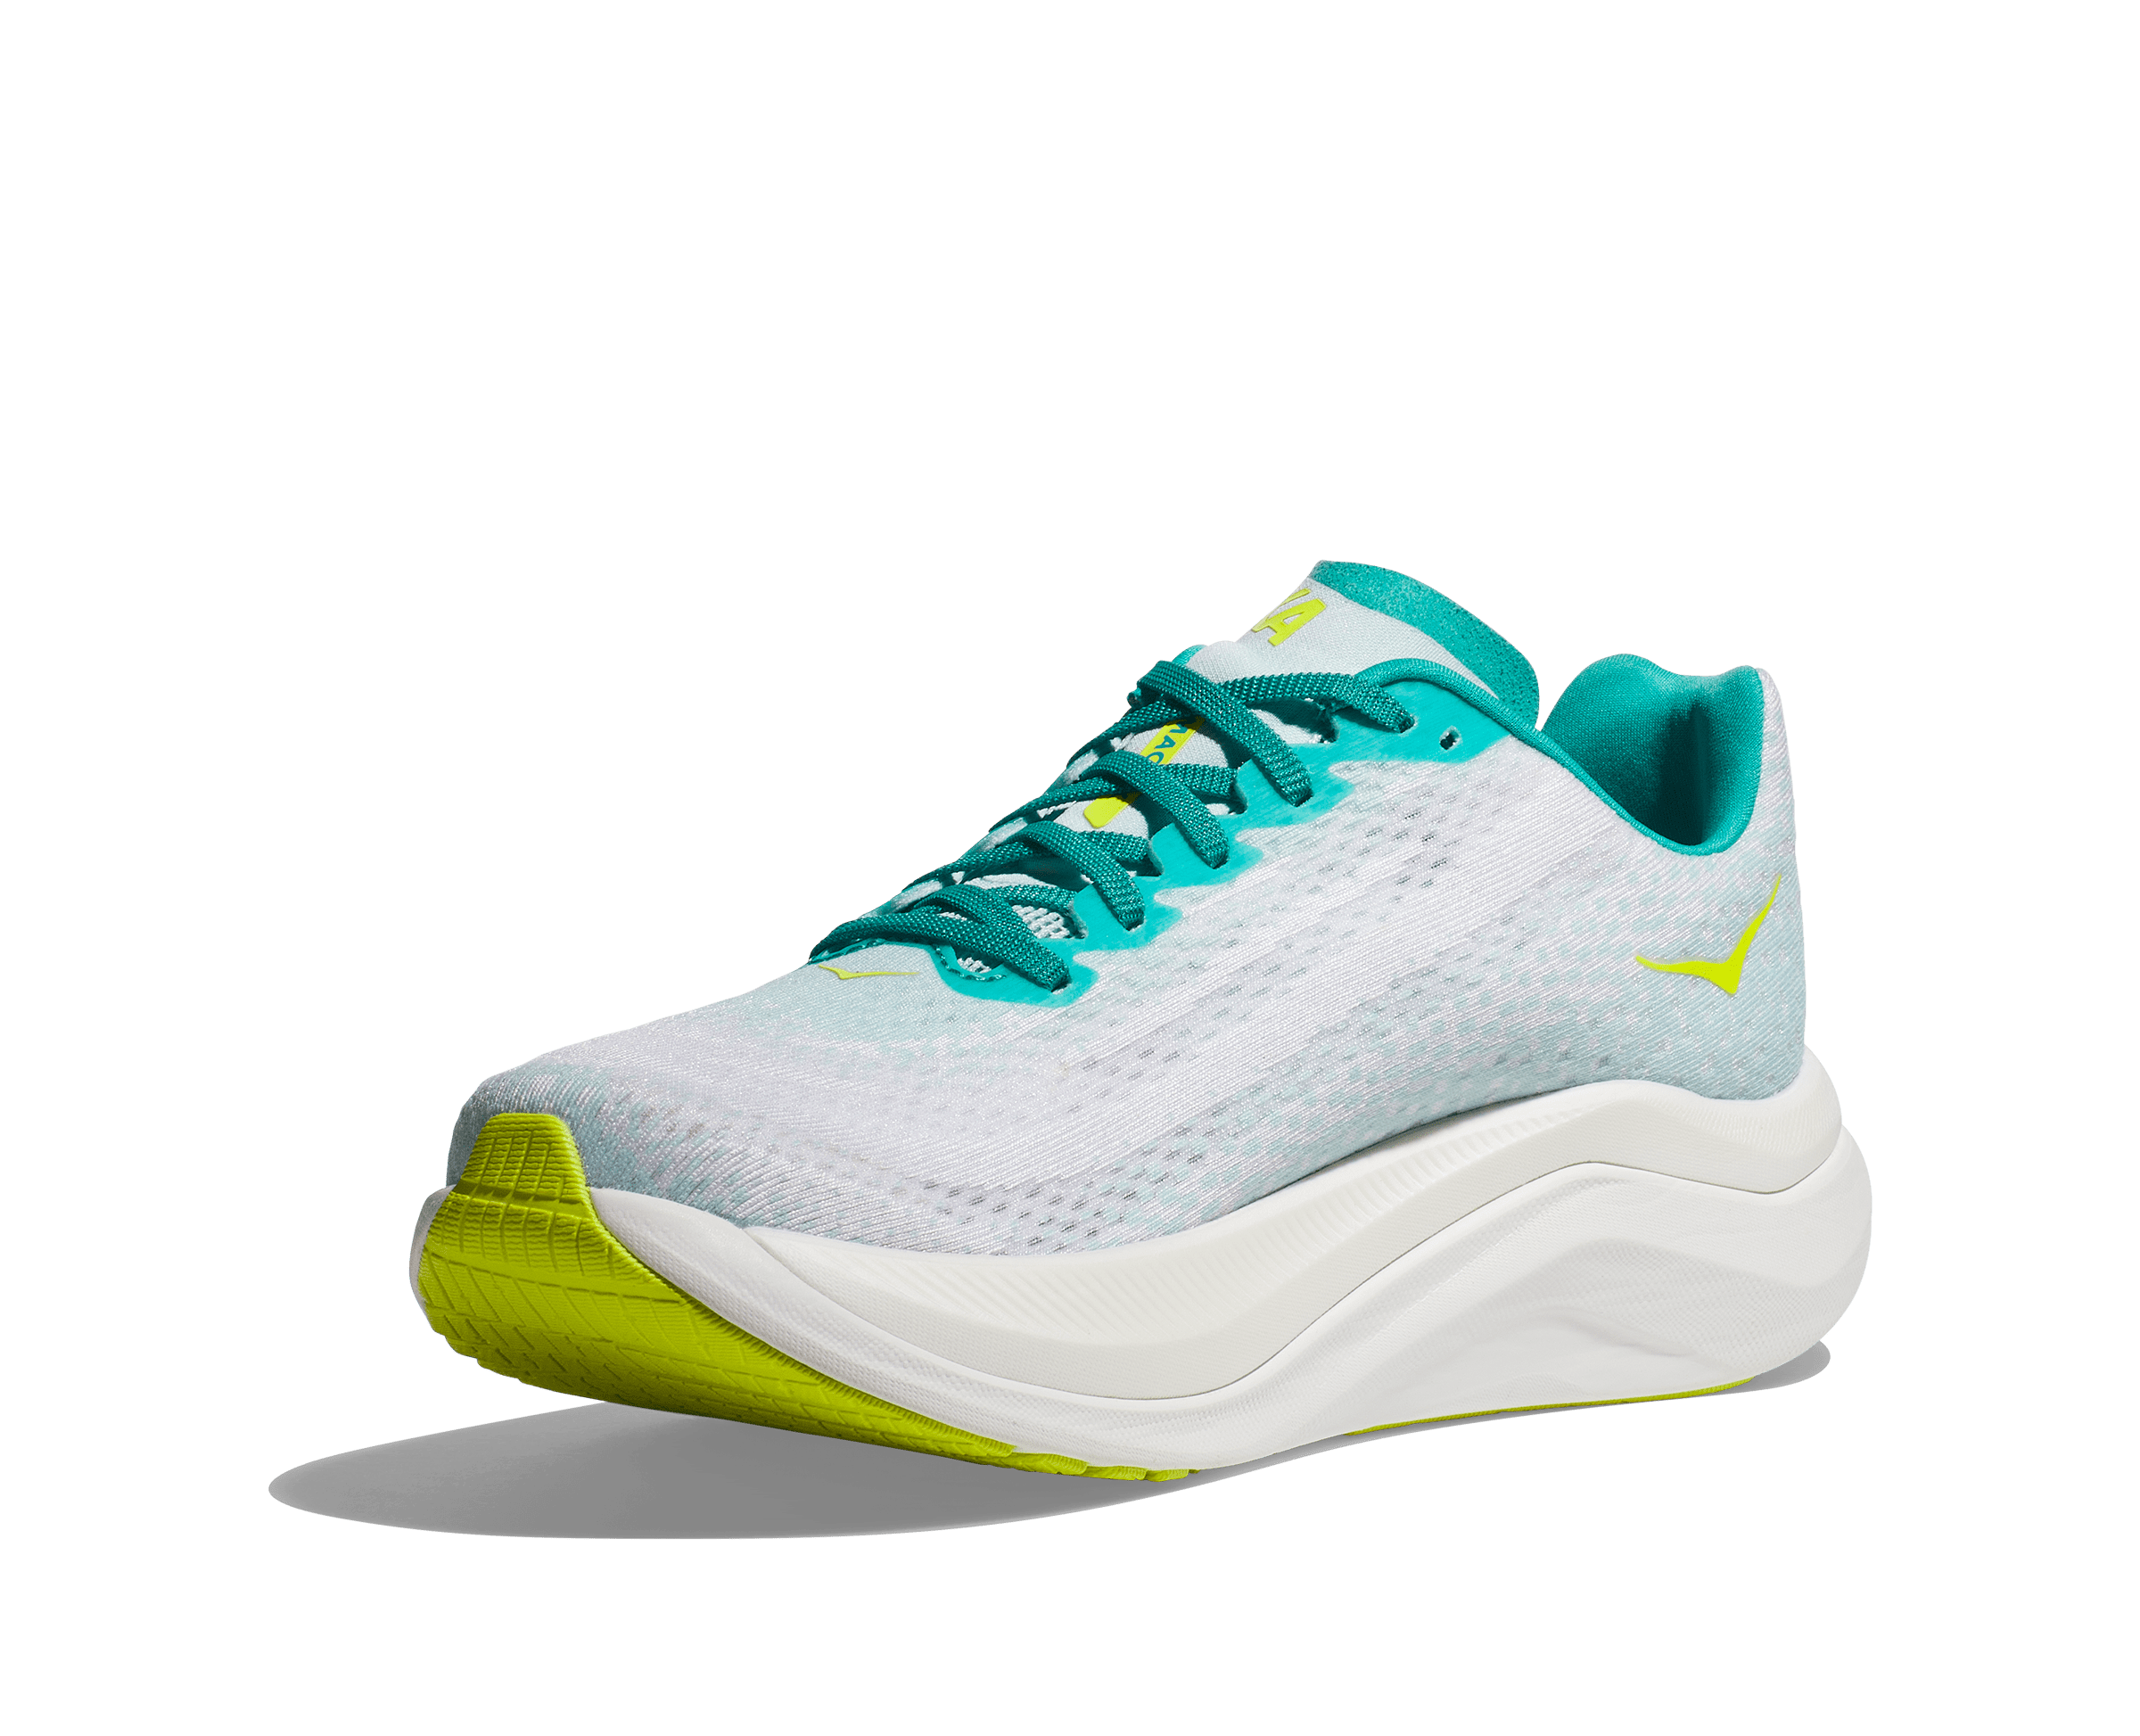 Medial view of the Men's Mach X by HOKA in the color White/Blue Glass